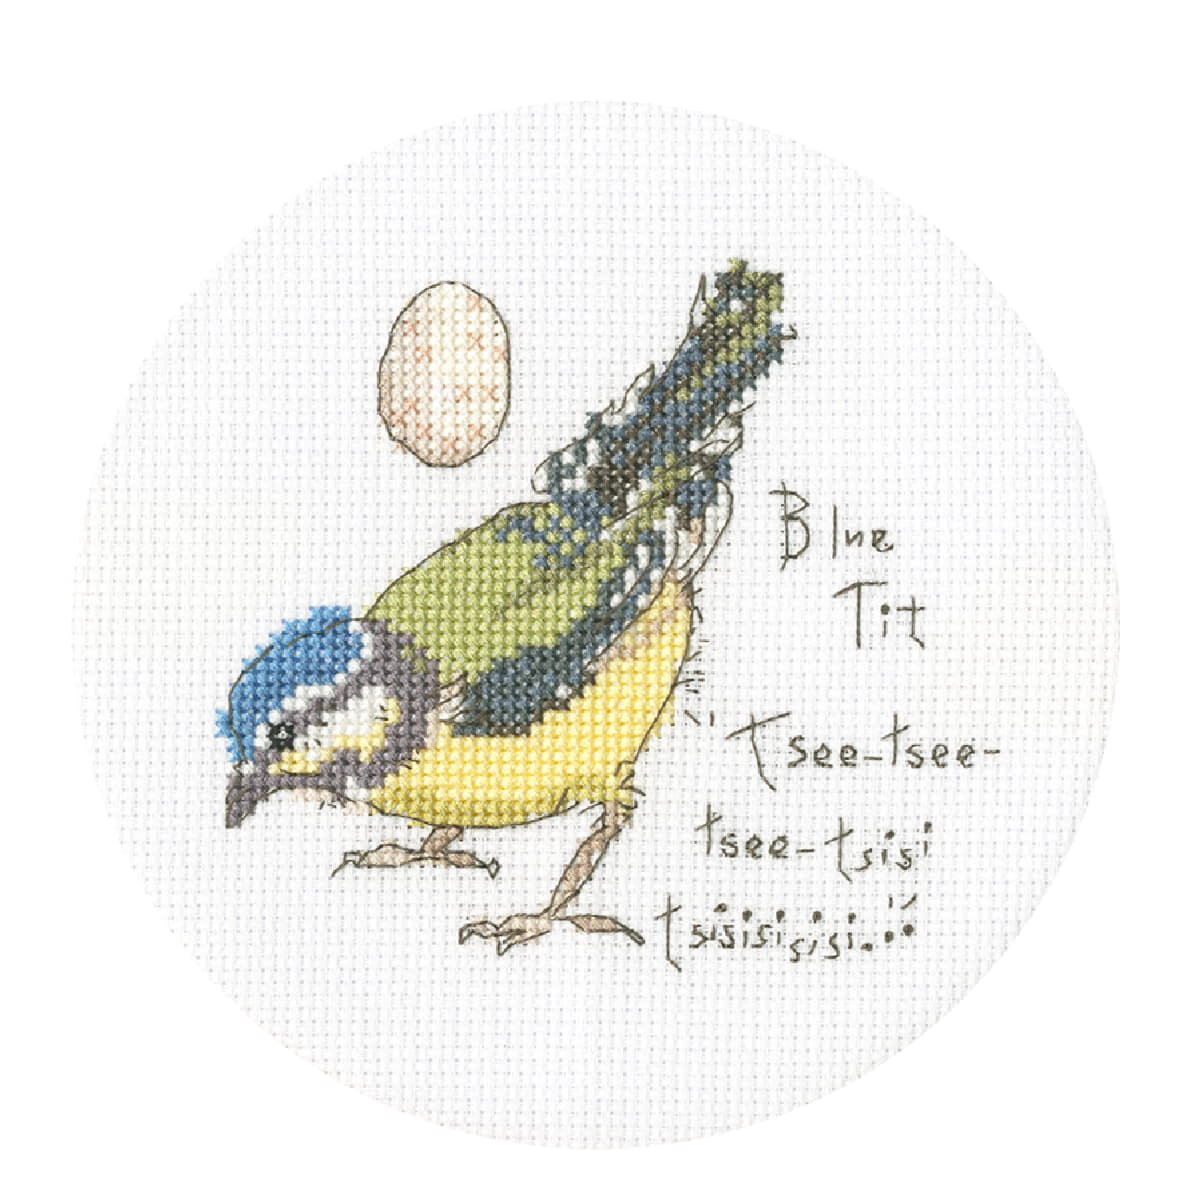 A cross-stitch picture shows a blue tit, which is...